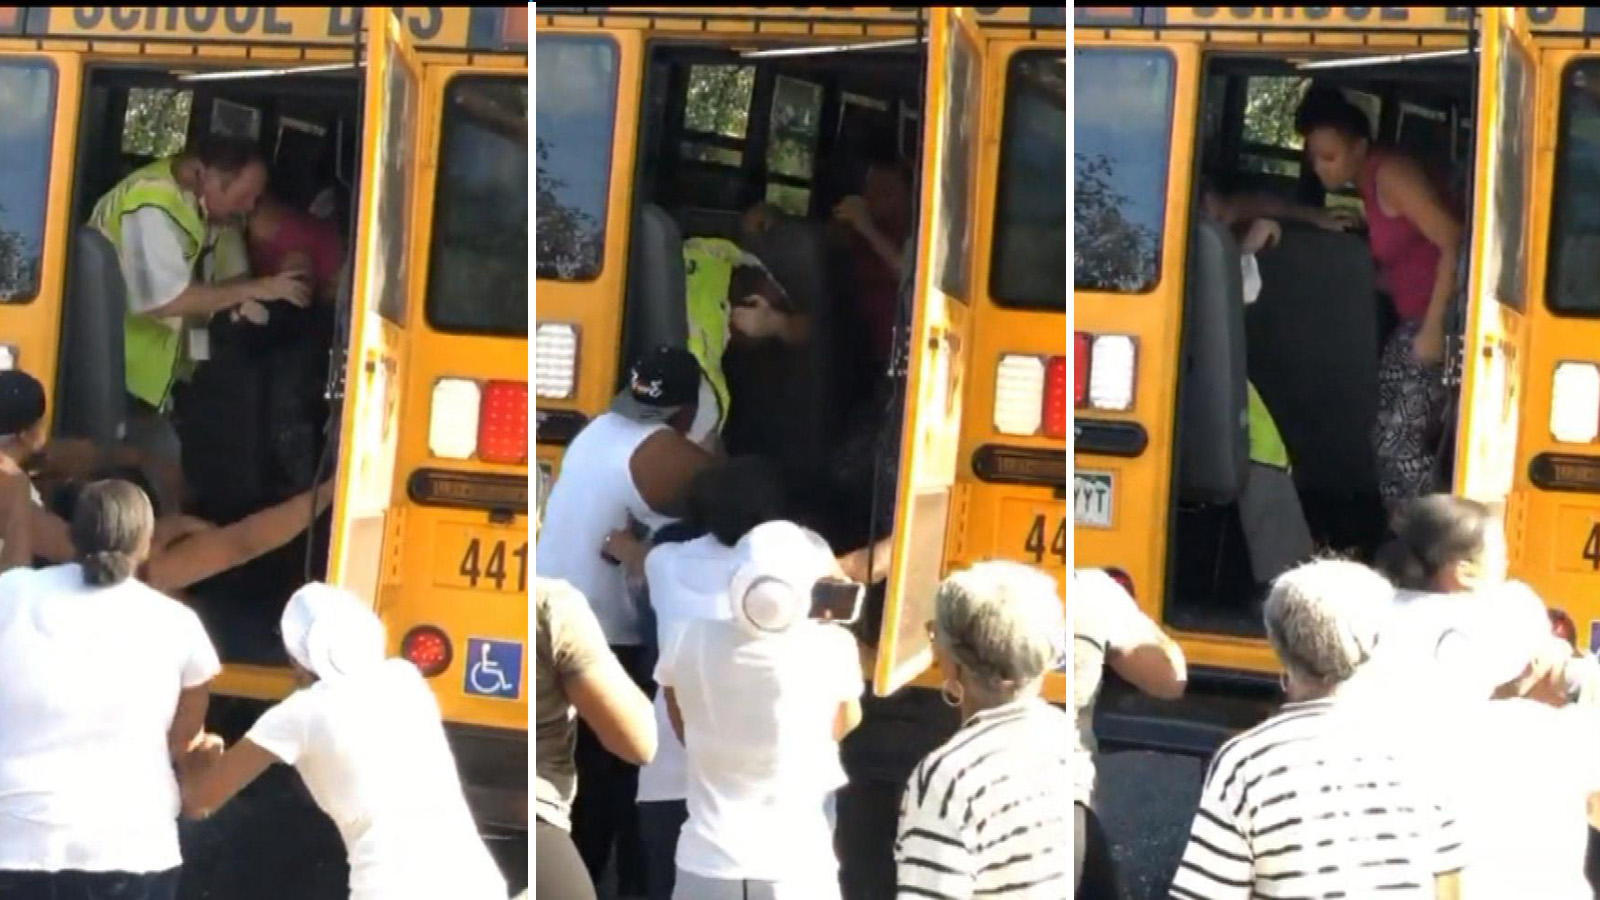 An image of the fight on the Denver Public Schools bus